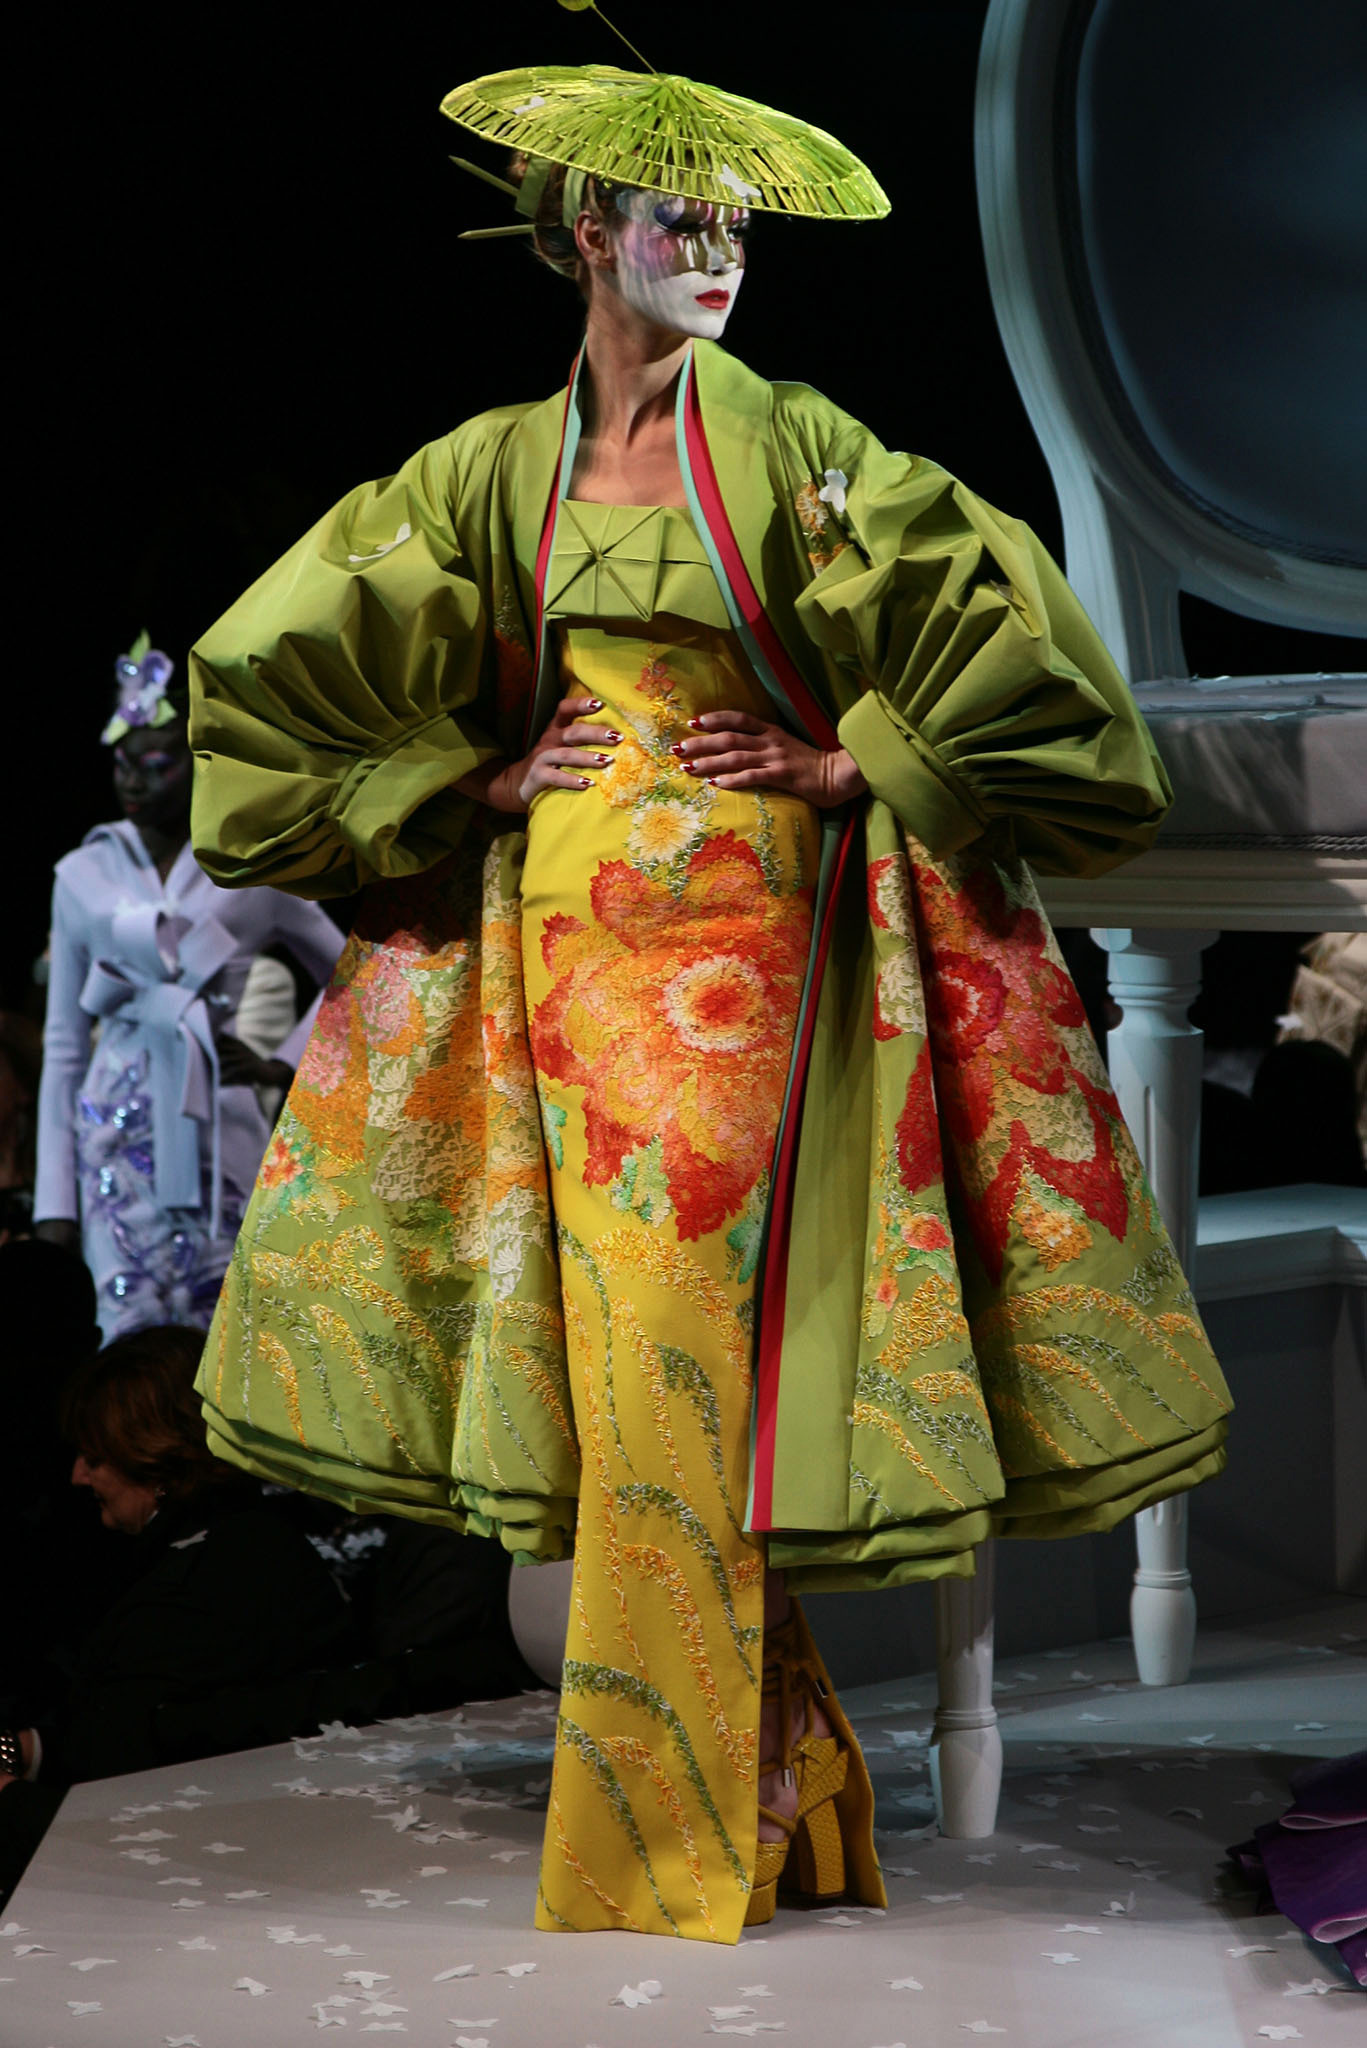 A model poses in an ensemble from Dior's "Madame Butterfly" collection designed by John Galliano at the Polo de Paris.